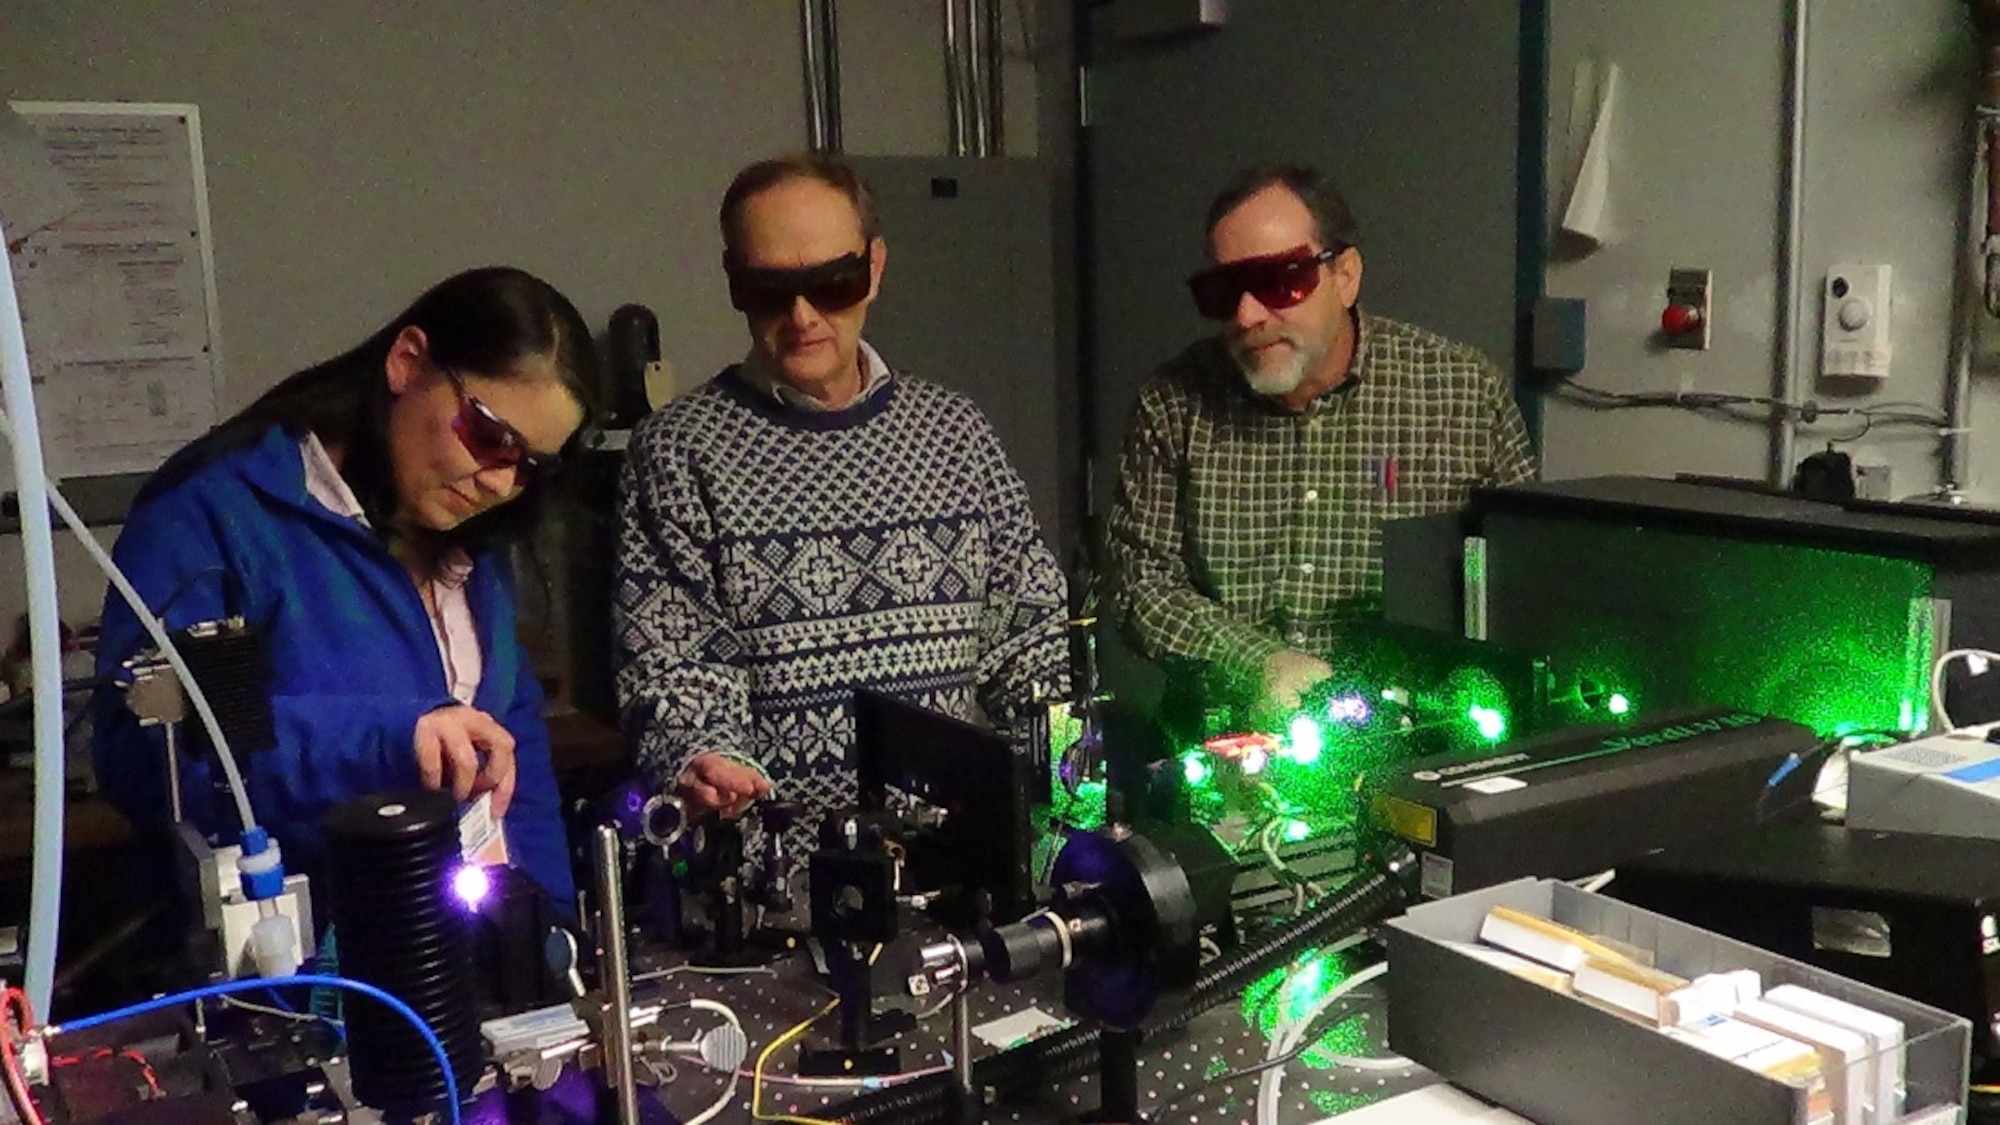 Kristin Galbally-Kinney, Steve Davis, and Terry Rawlins, of Physical Sciences Inc., adjust the excitation source for an argon microplasma laser. (Contributed photo)